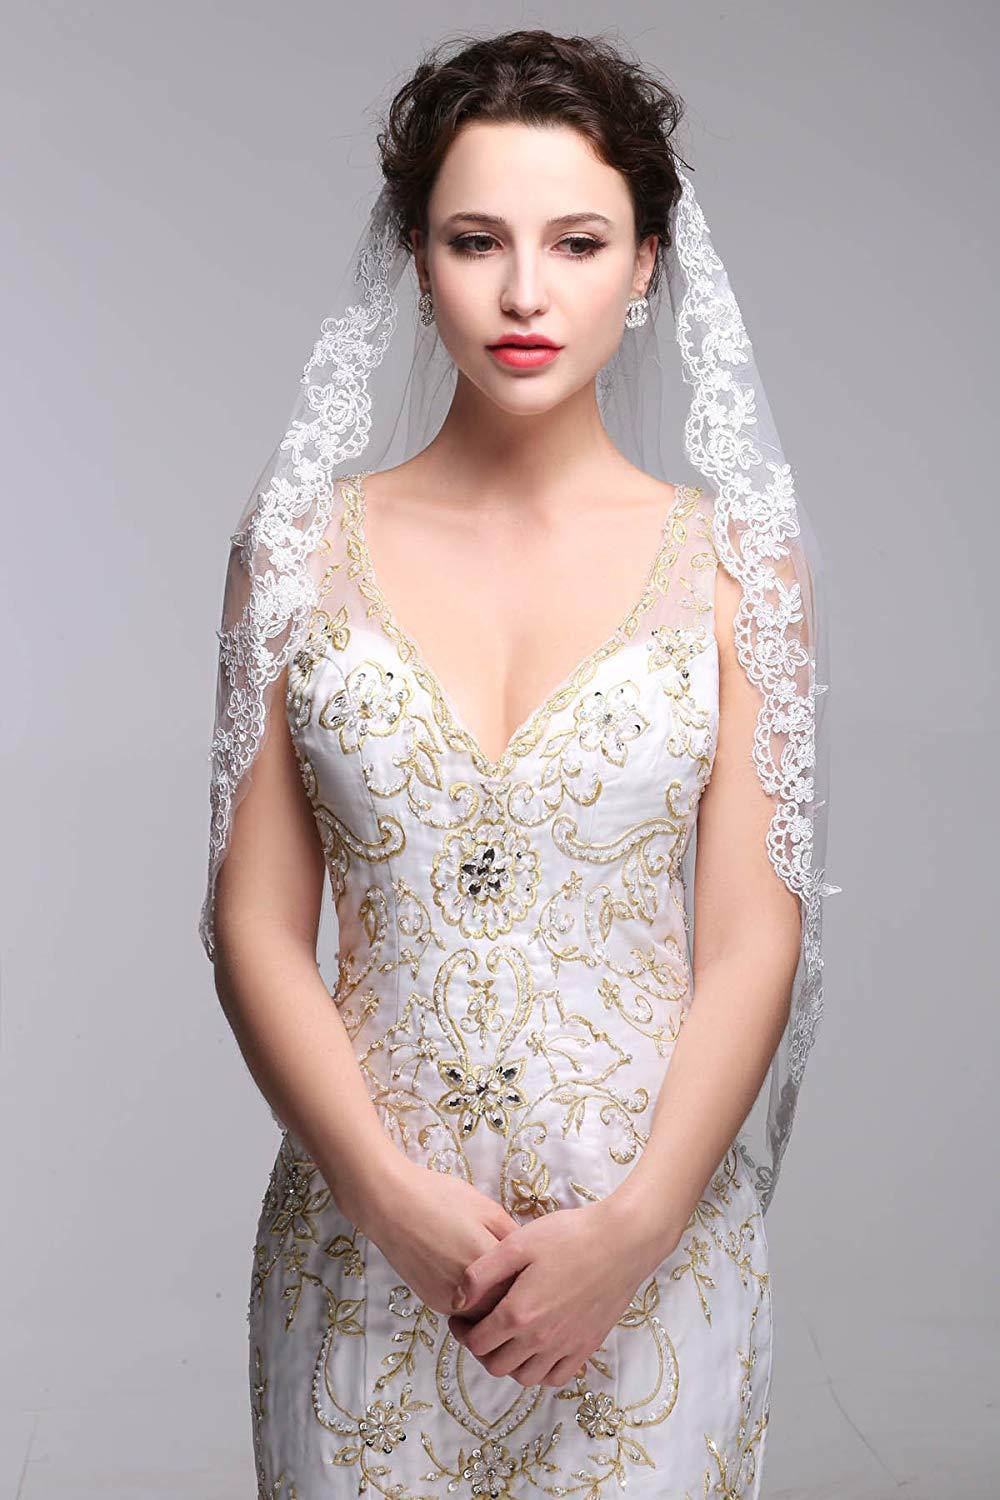 White Ivory Lace Edge Elbow Length Bridal Veil - TulleLux Bridal Crowns &  Accessories 